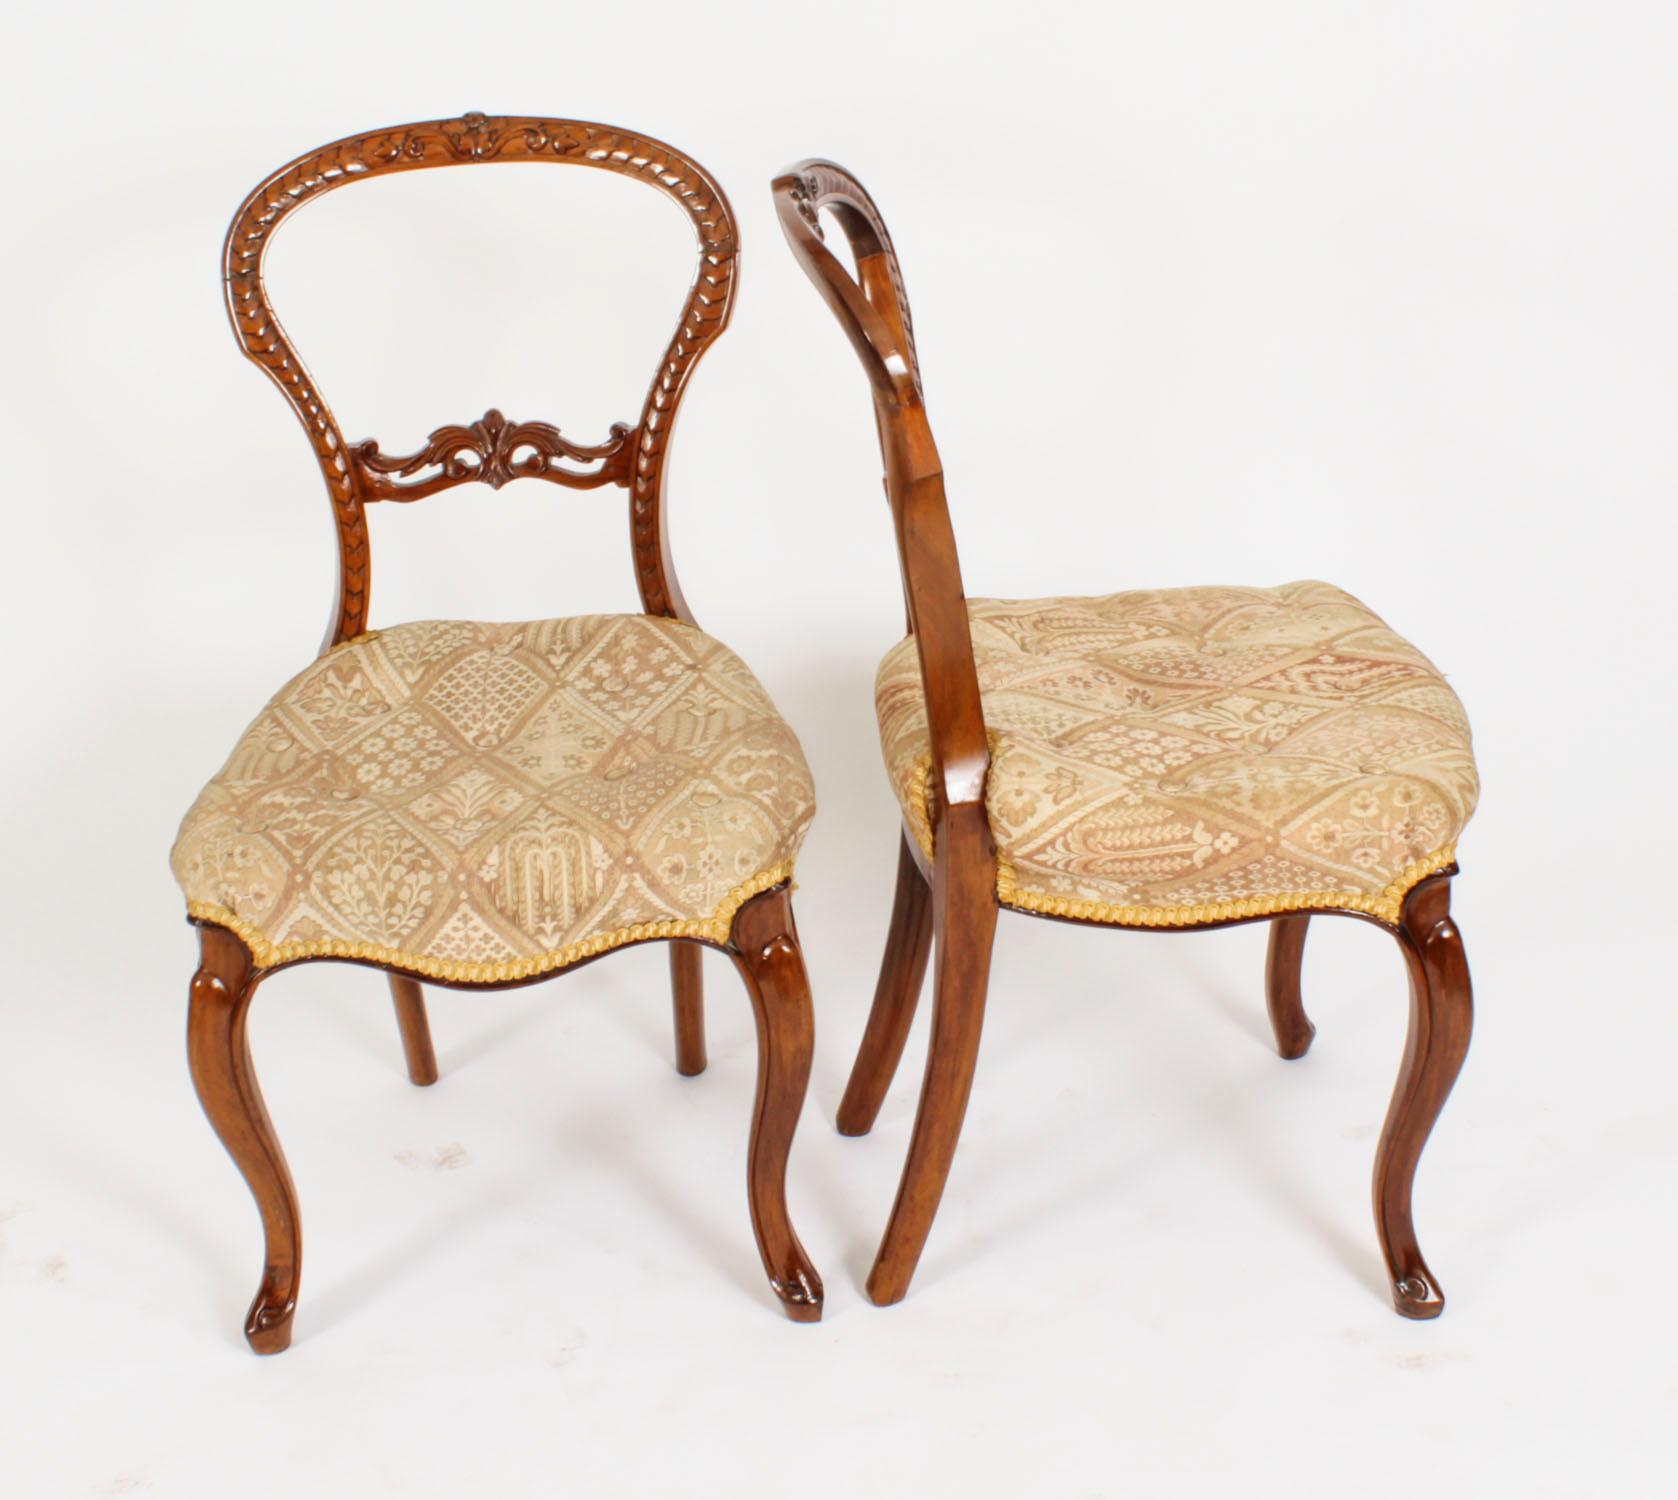 This is a beautiful set of six English antique Victorian walnut dining chairs, circa 1860 in date.

They have striking carved solid walnut backs and mid rails and are raised on elegant cabriole legs. The seats are upholstered in a sumptuous cream